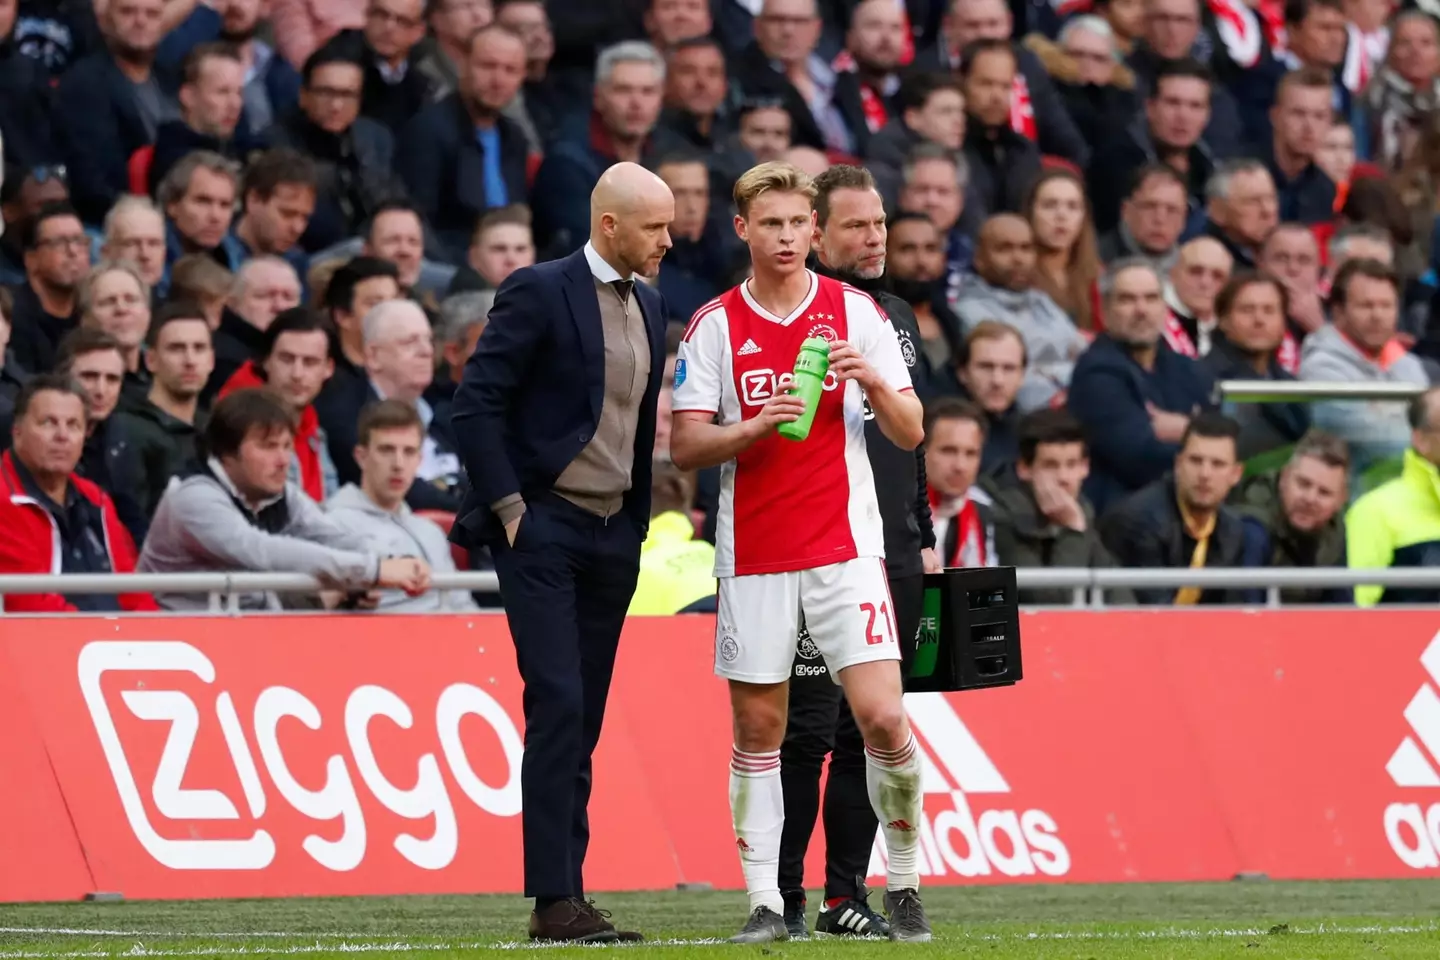 De Jong and ten Hag previously worked together at Ajax. (Image